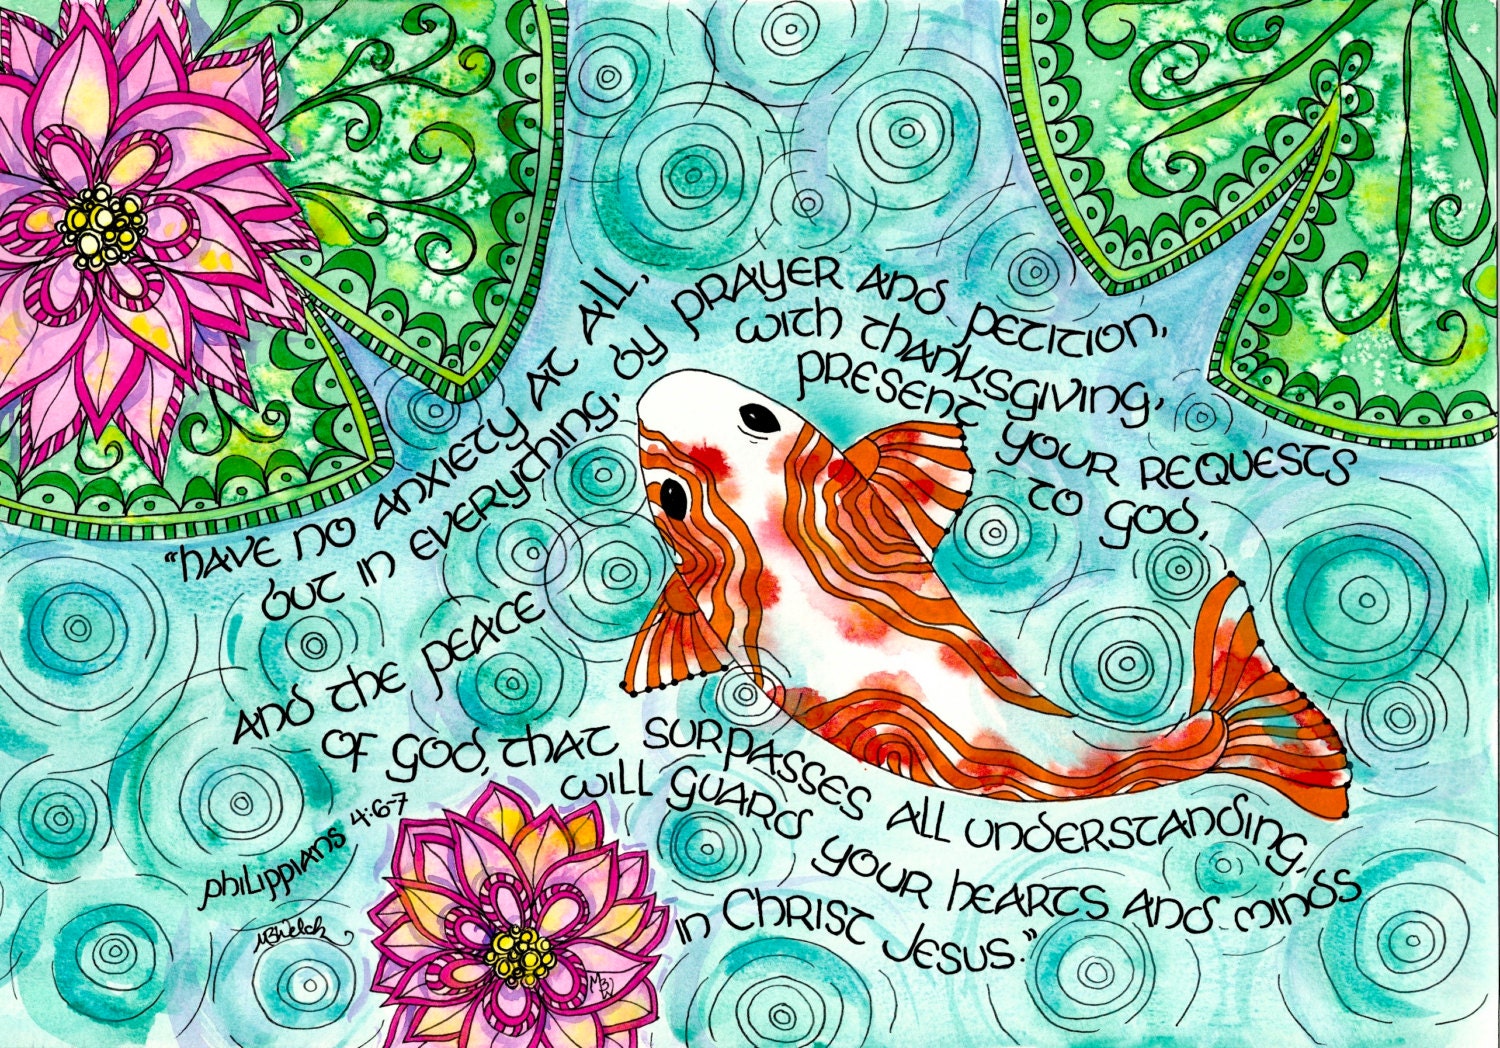 Philippians 4 6-7 Scripture Art With Koi Fish, Lily Pads, Print of  Watercolor, Peaceful Christian Art, Teal, Blue Green, Teen Decor or Gift -   Singapore